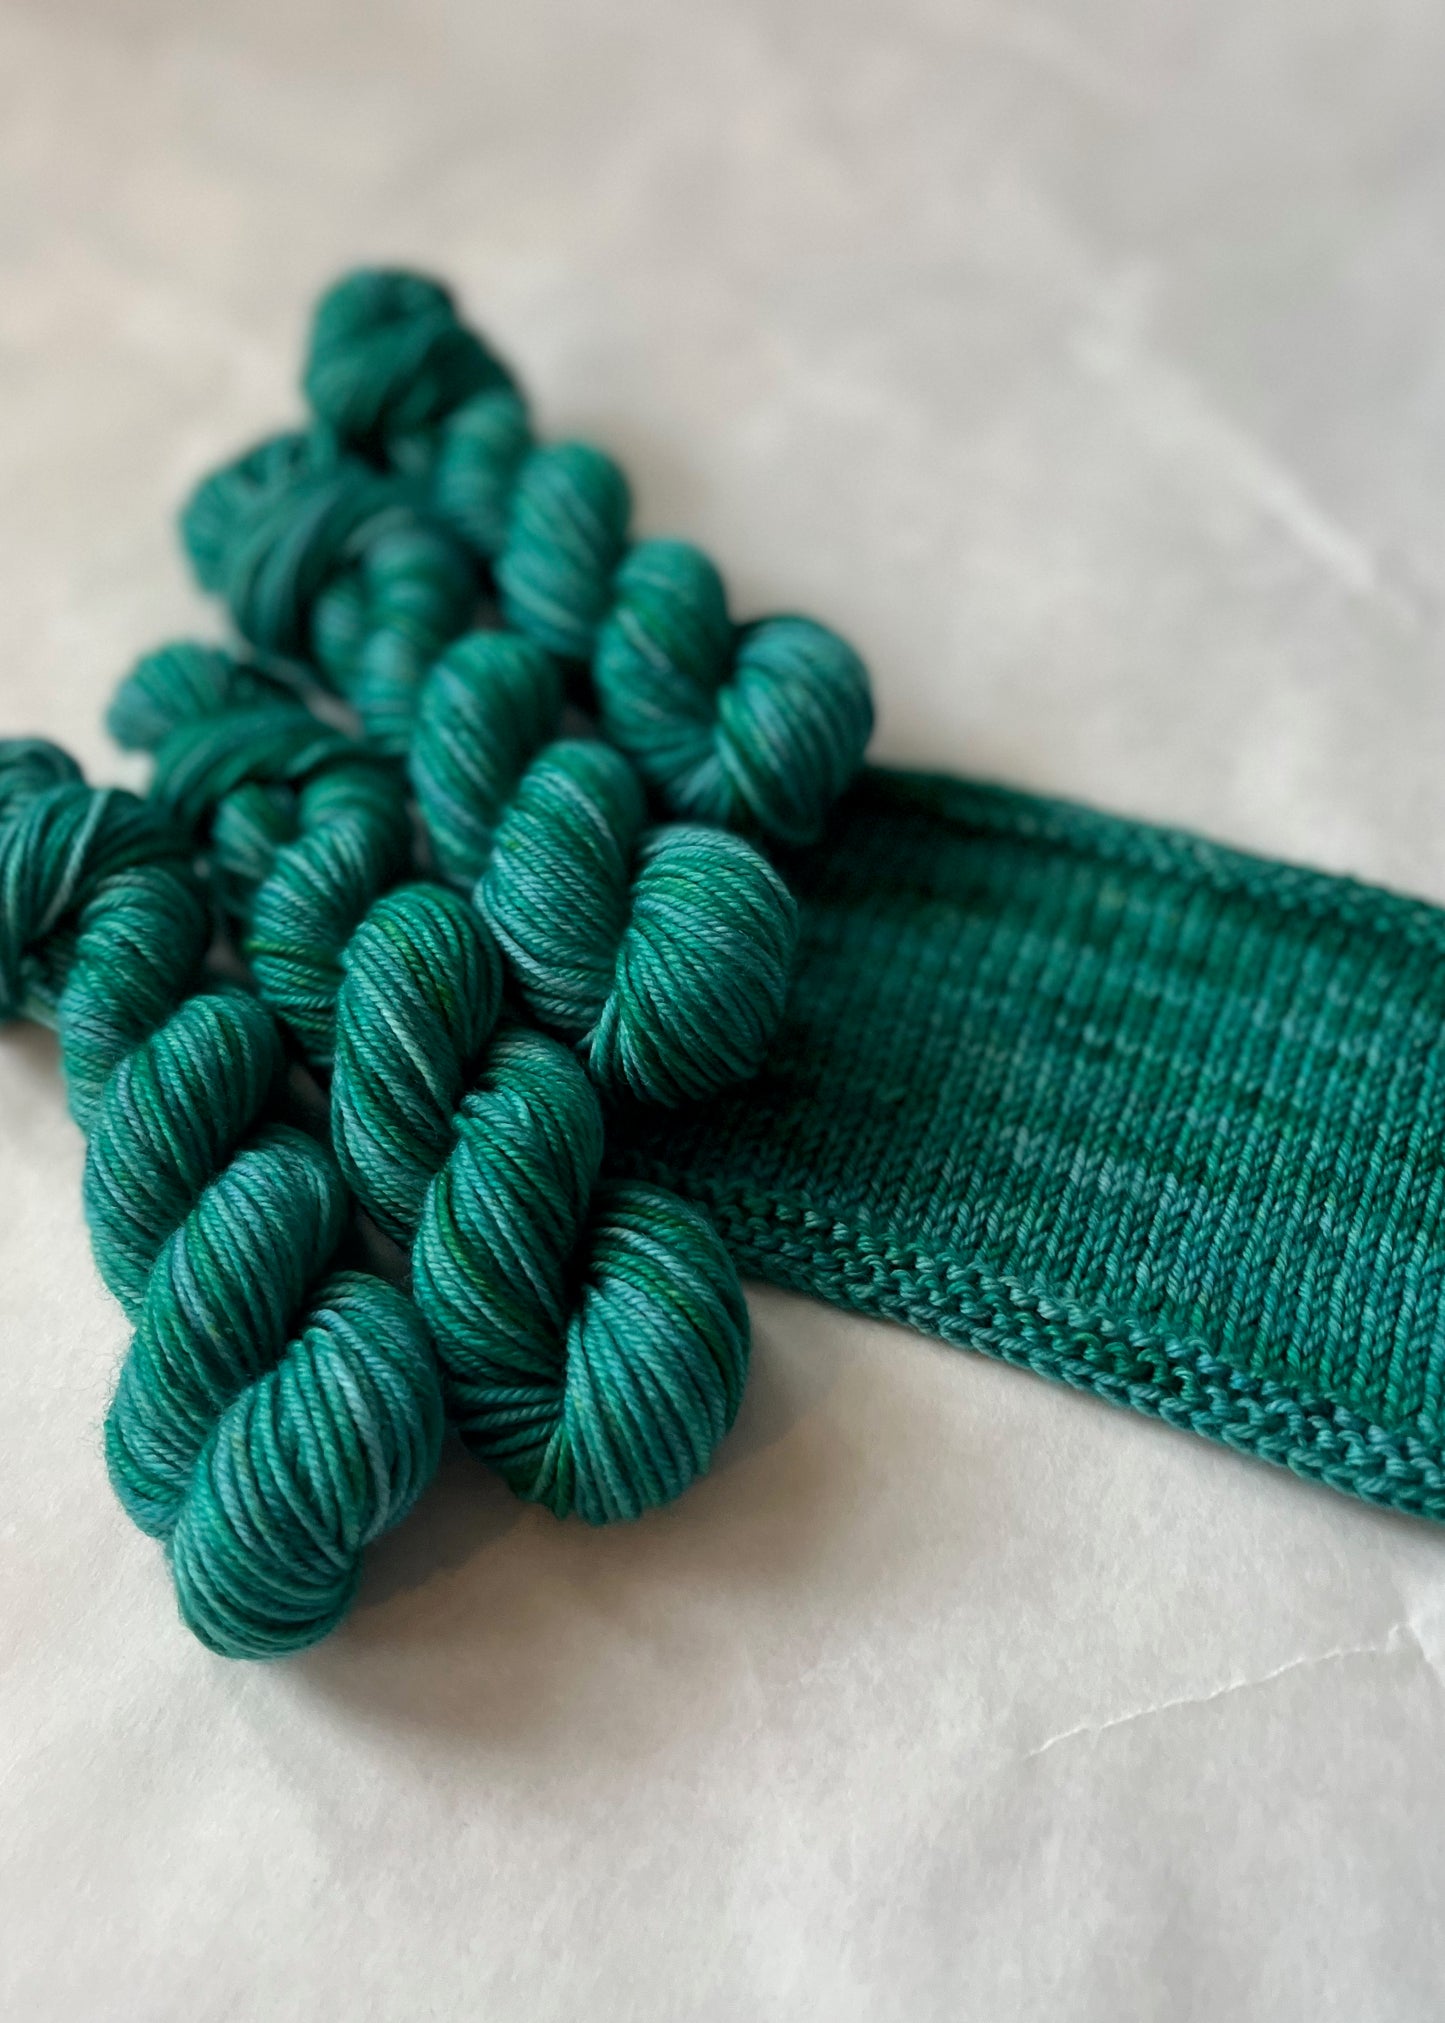 Dyed to order: Emerald Isle